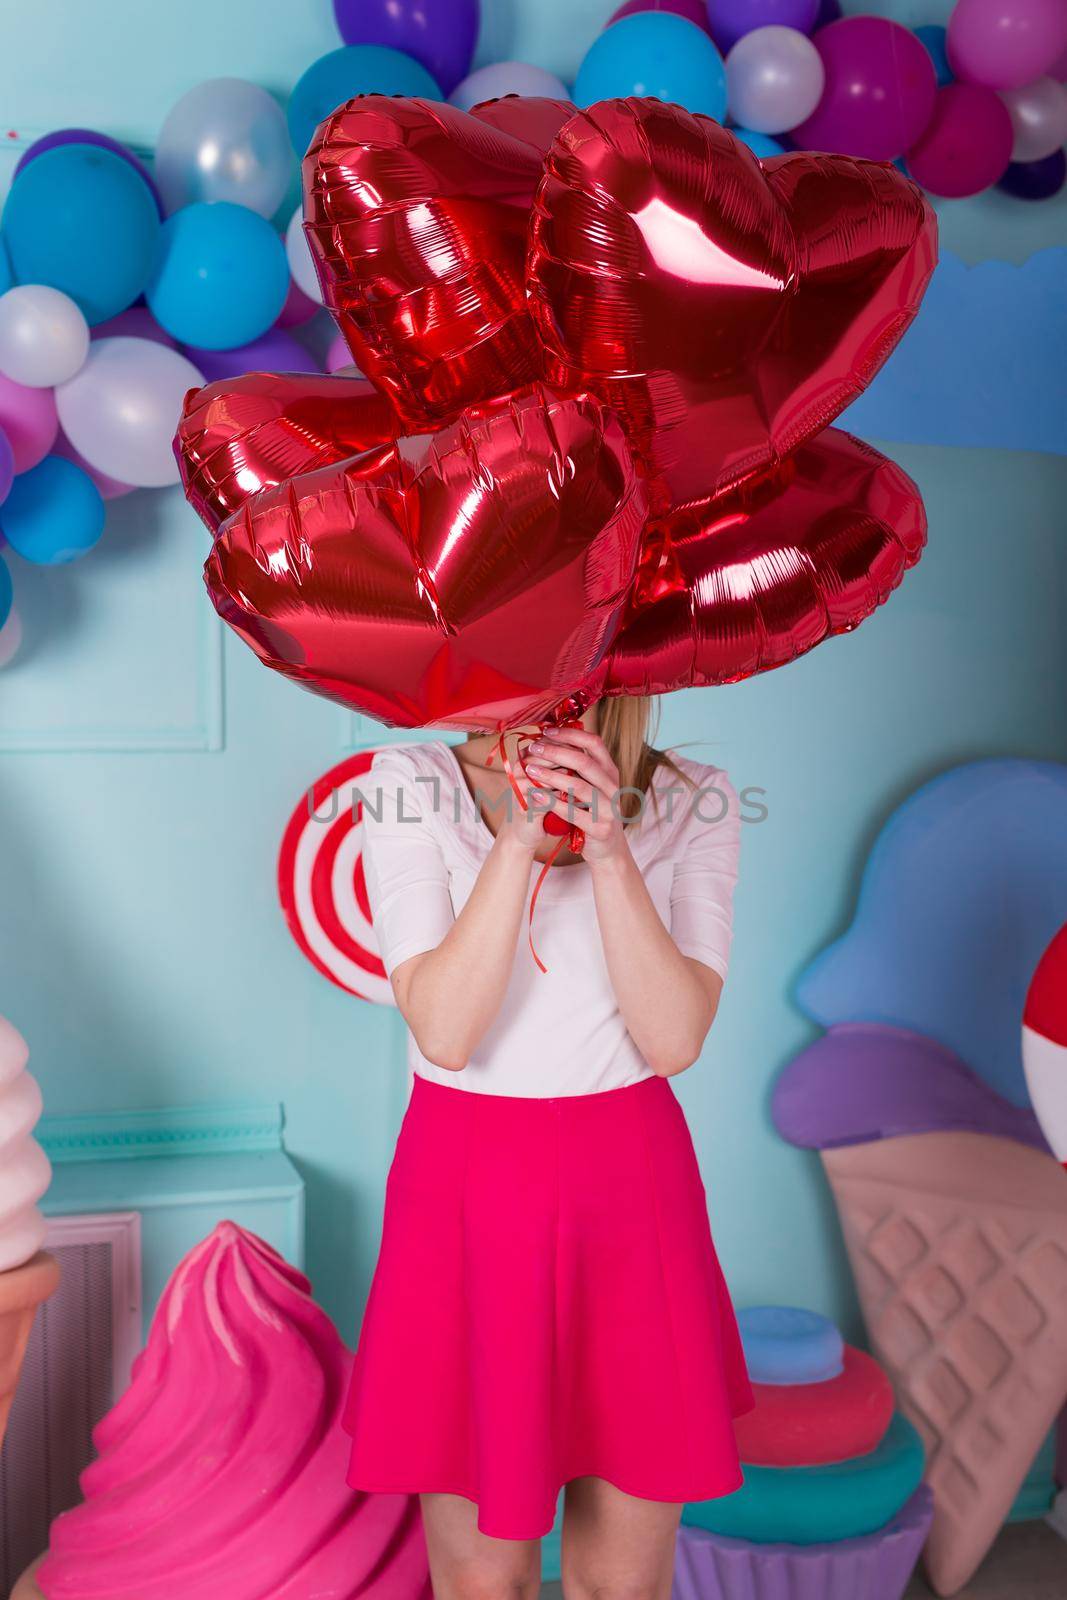 Fashion portrait of young woman in pink dress with an air balloons, candy on a colorful background by StudioPeace